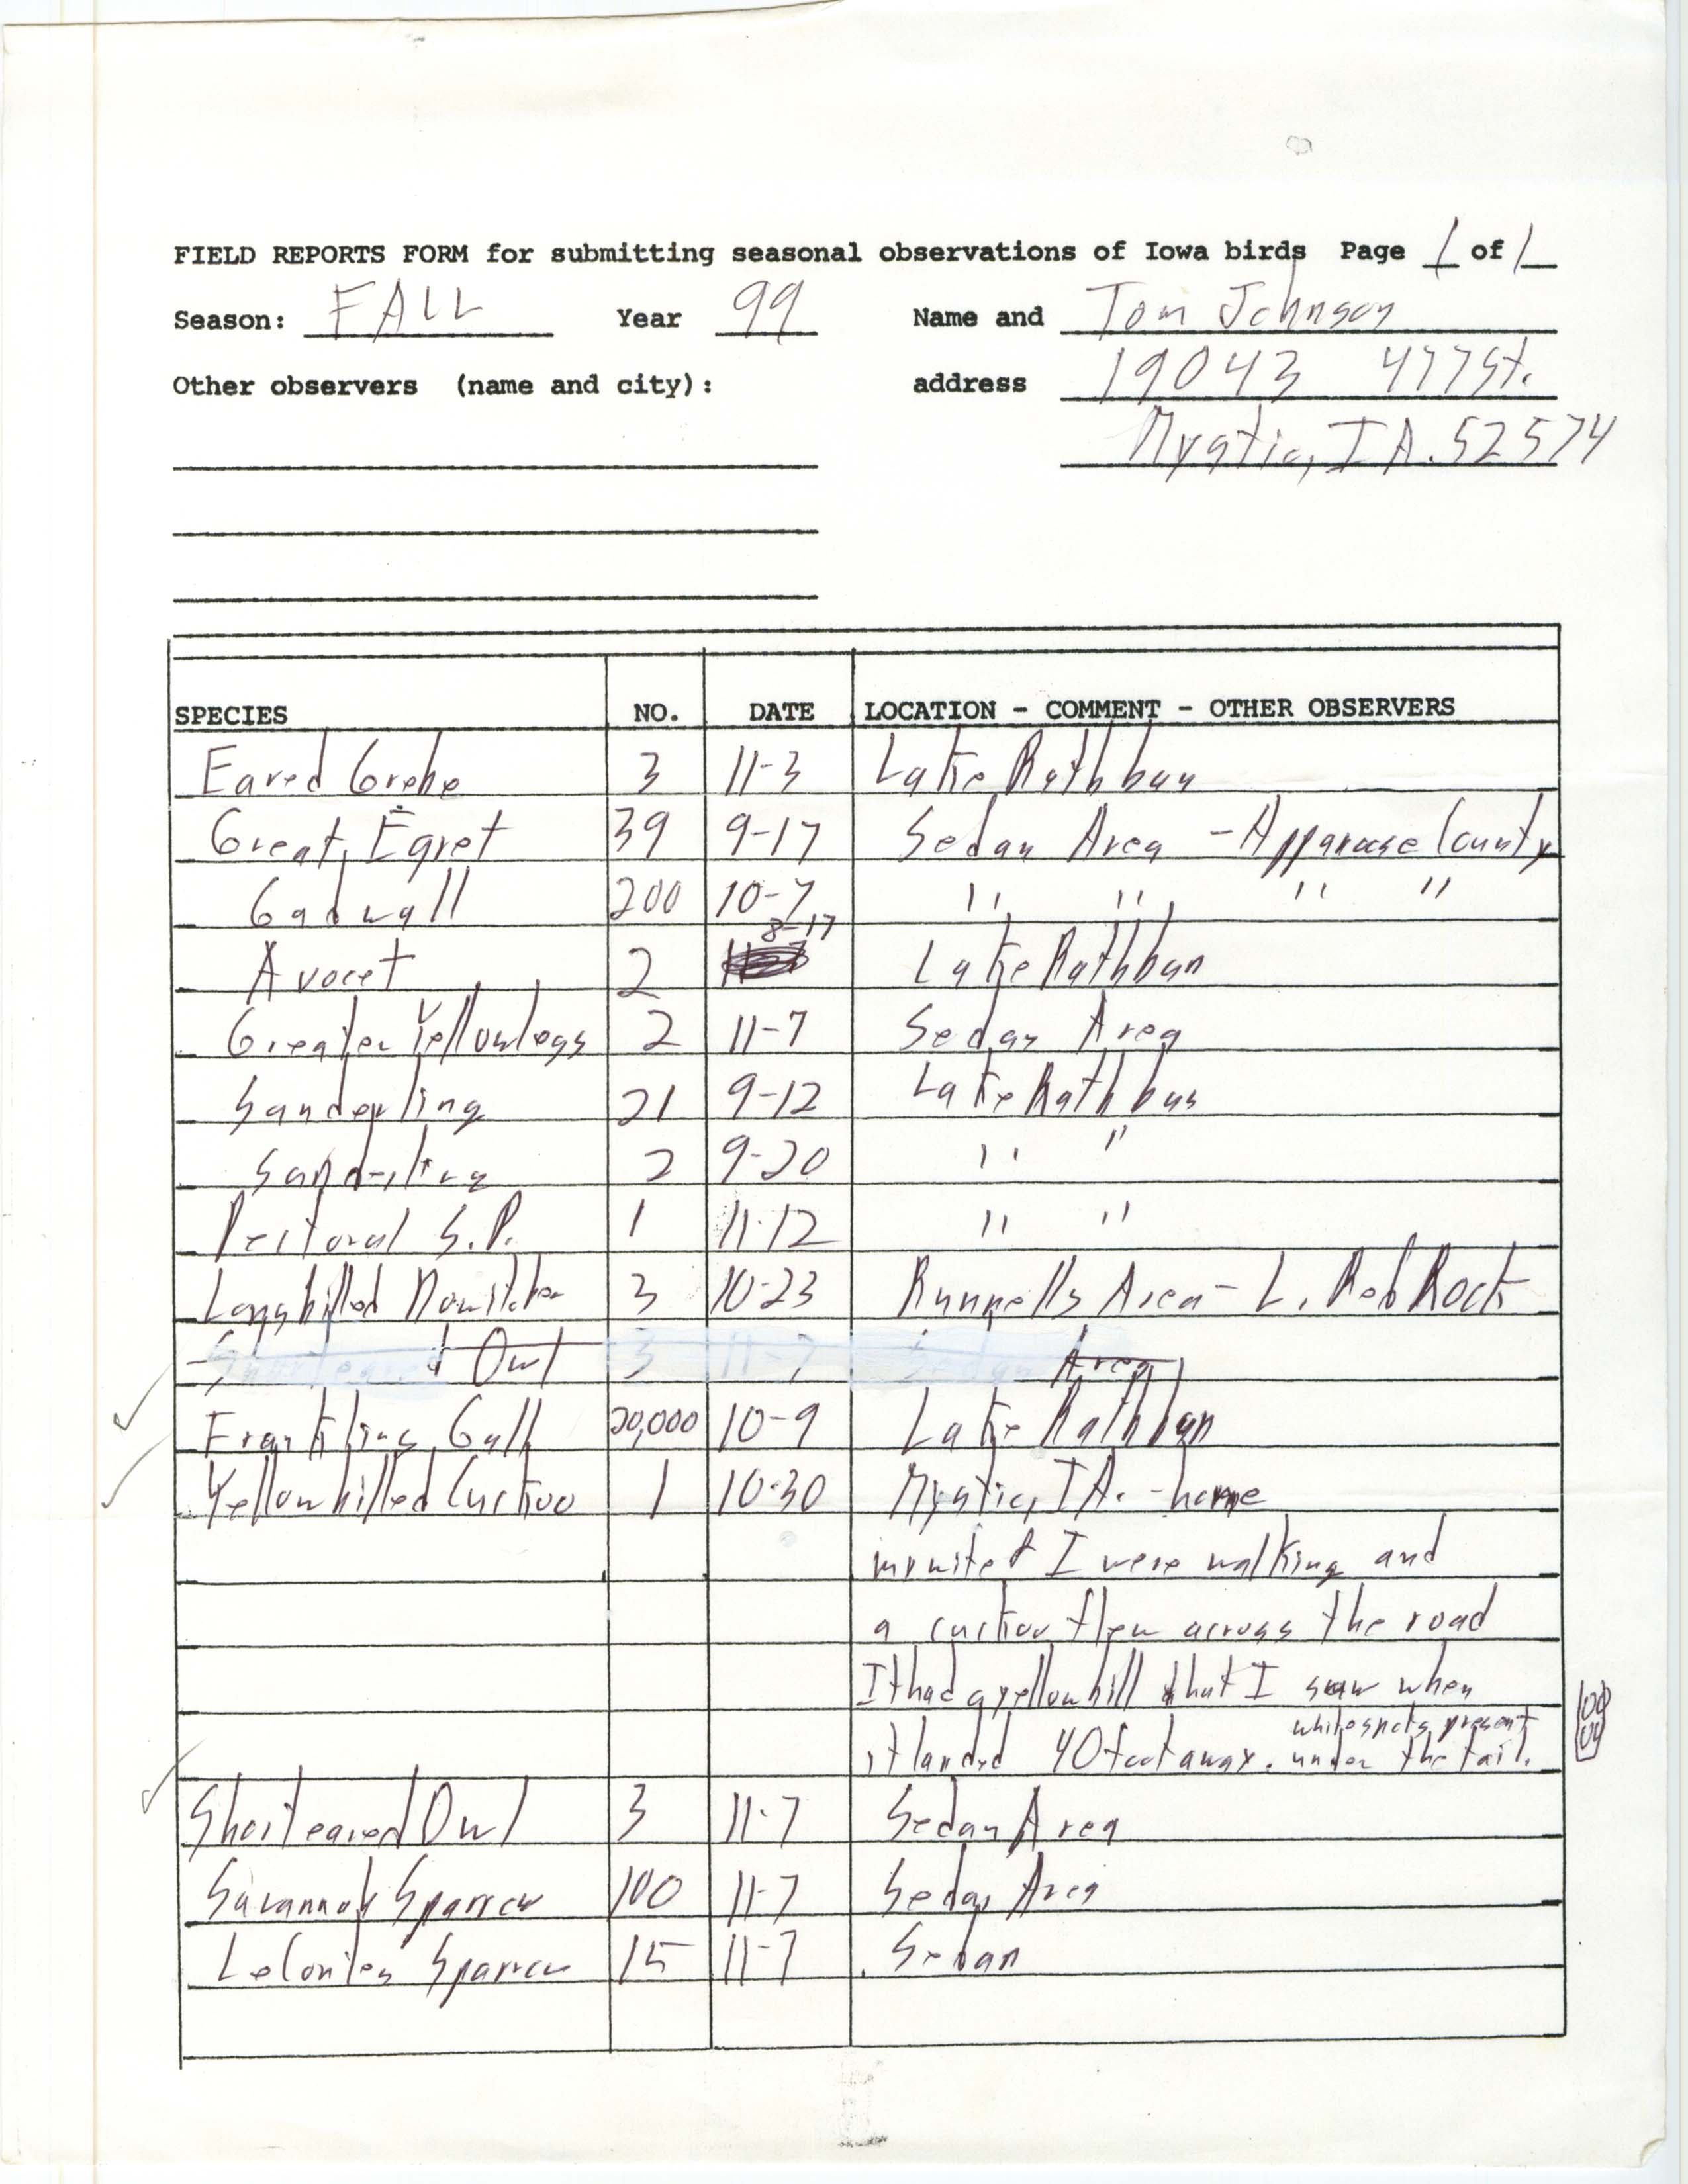 Field reports form for submitting seasonal observations of Iowa birds, fall 1999, Tom Johnson